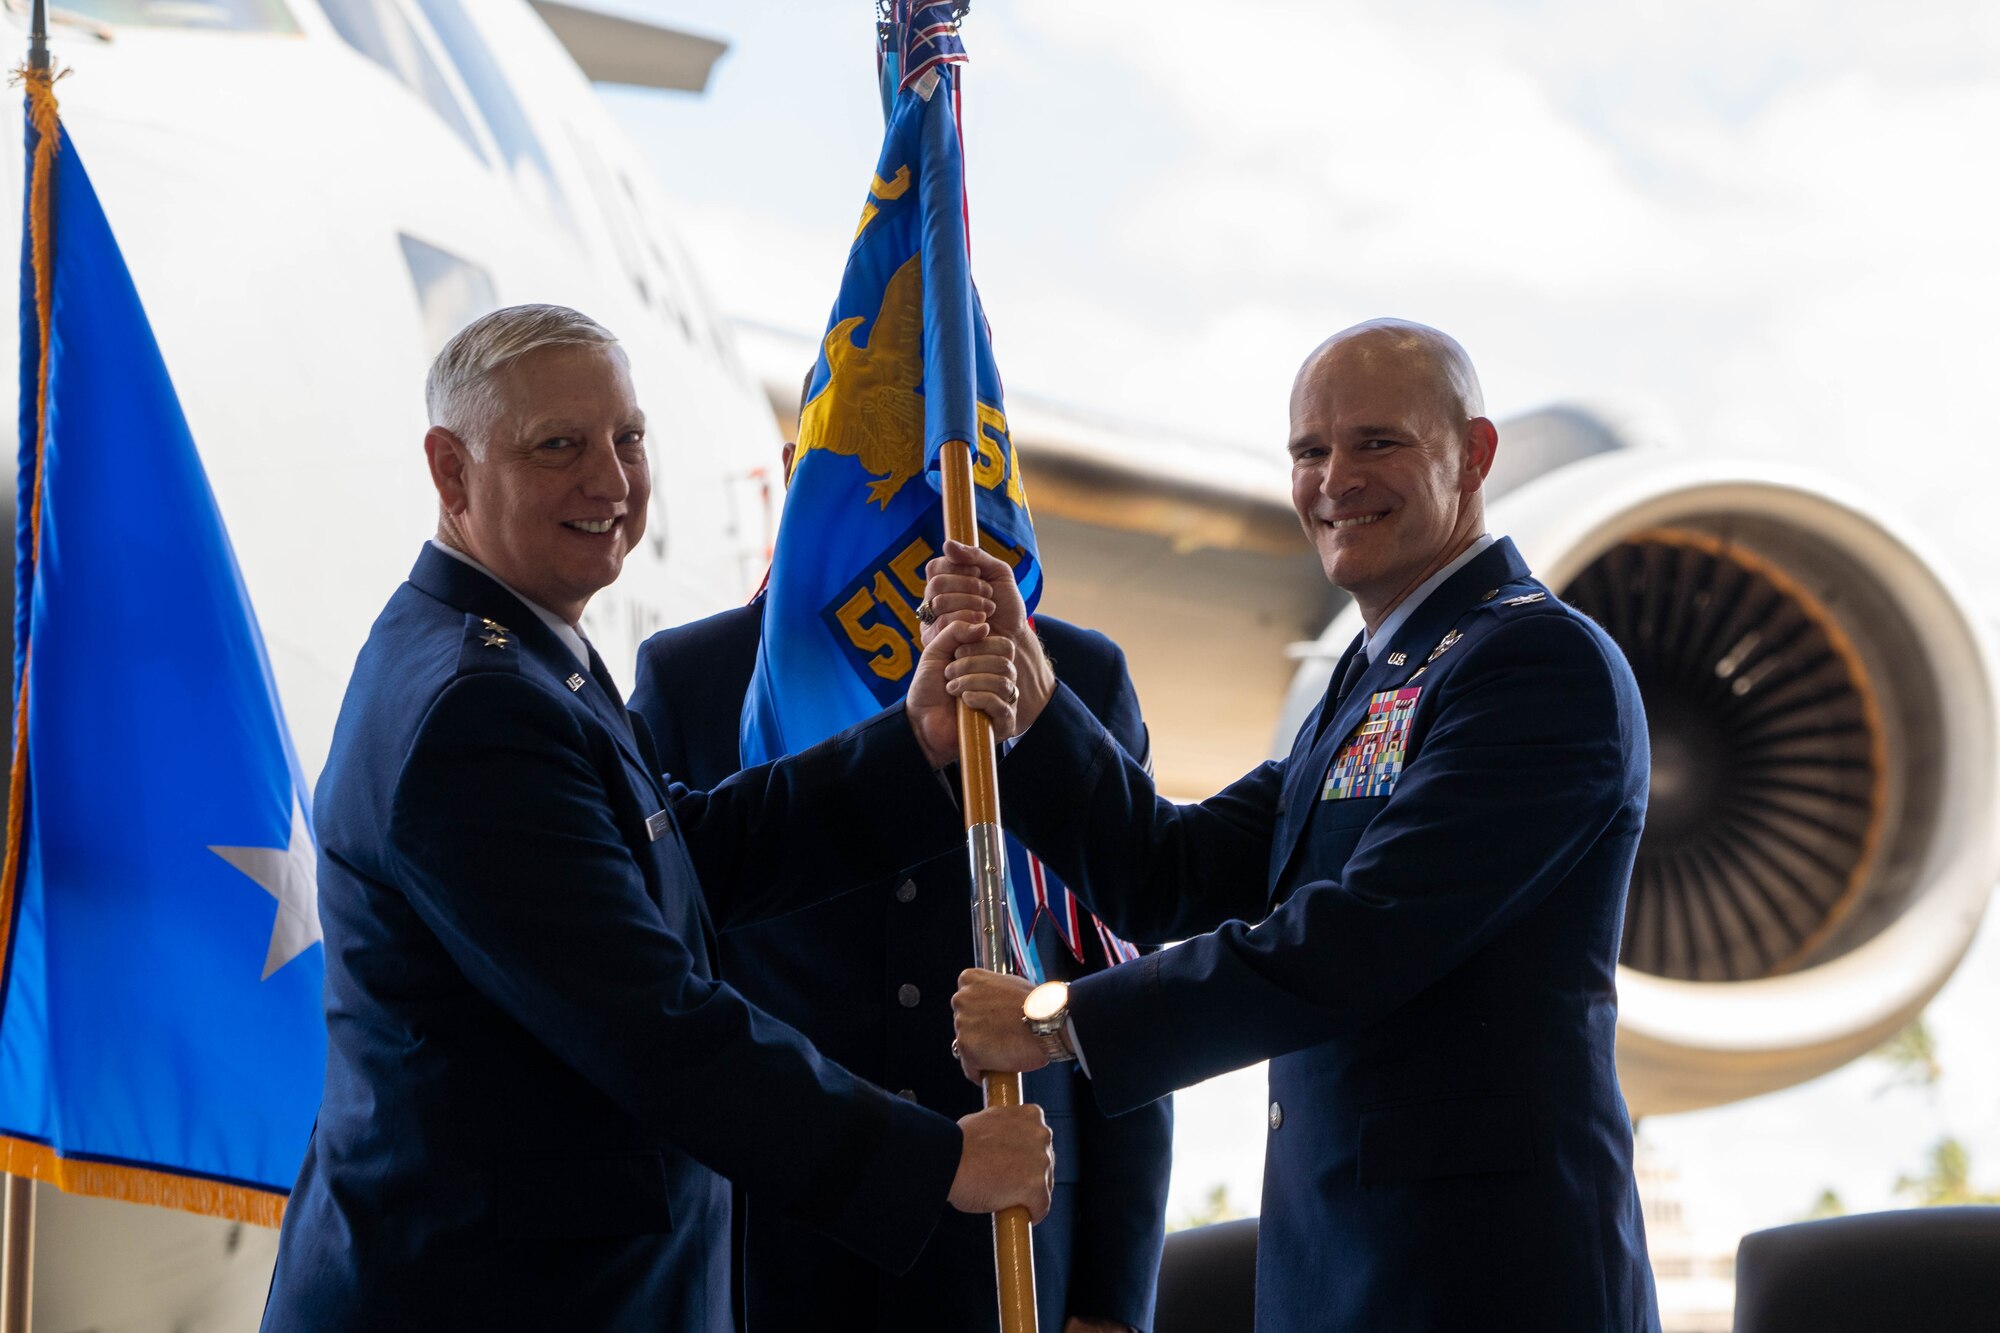 U.S. Air Force Maj. Gen. Mark D. Camerer, left, U.S. Air Force Expeditionary Center commander, passes the guidon to Col. Kyle A. Benwitz, 515th Air Mobility Operations Wing commander, as a symbol of Benwitz assuming command during the wing's June 28, 2022 change of command ceremony.